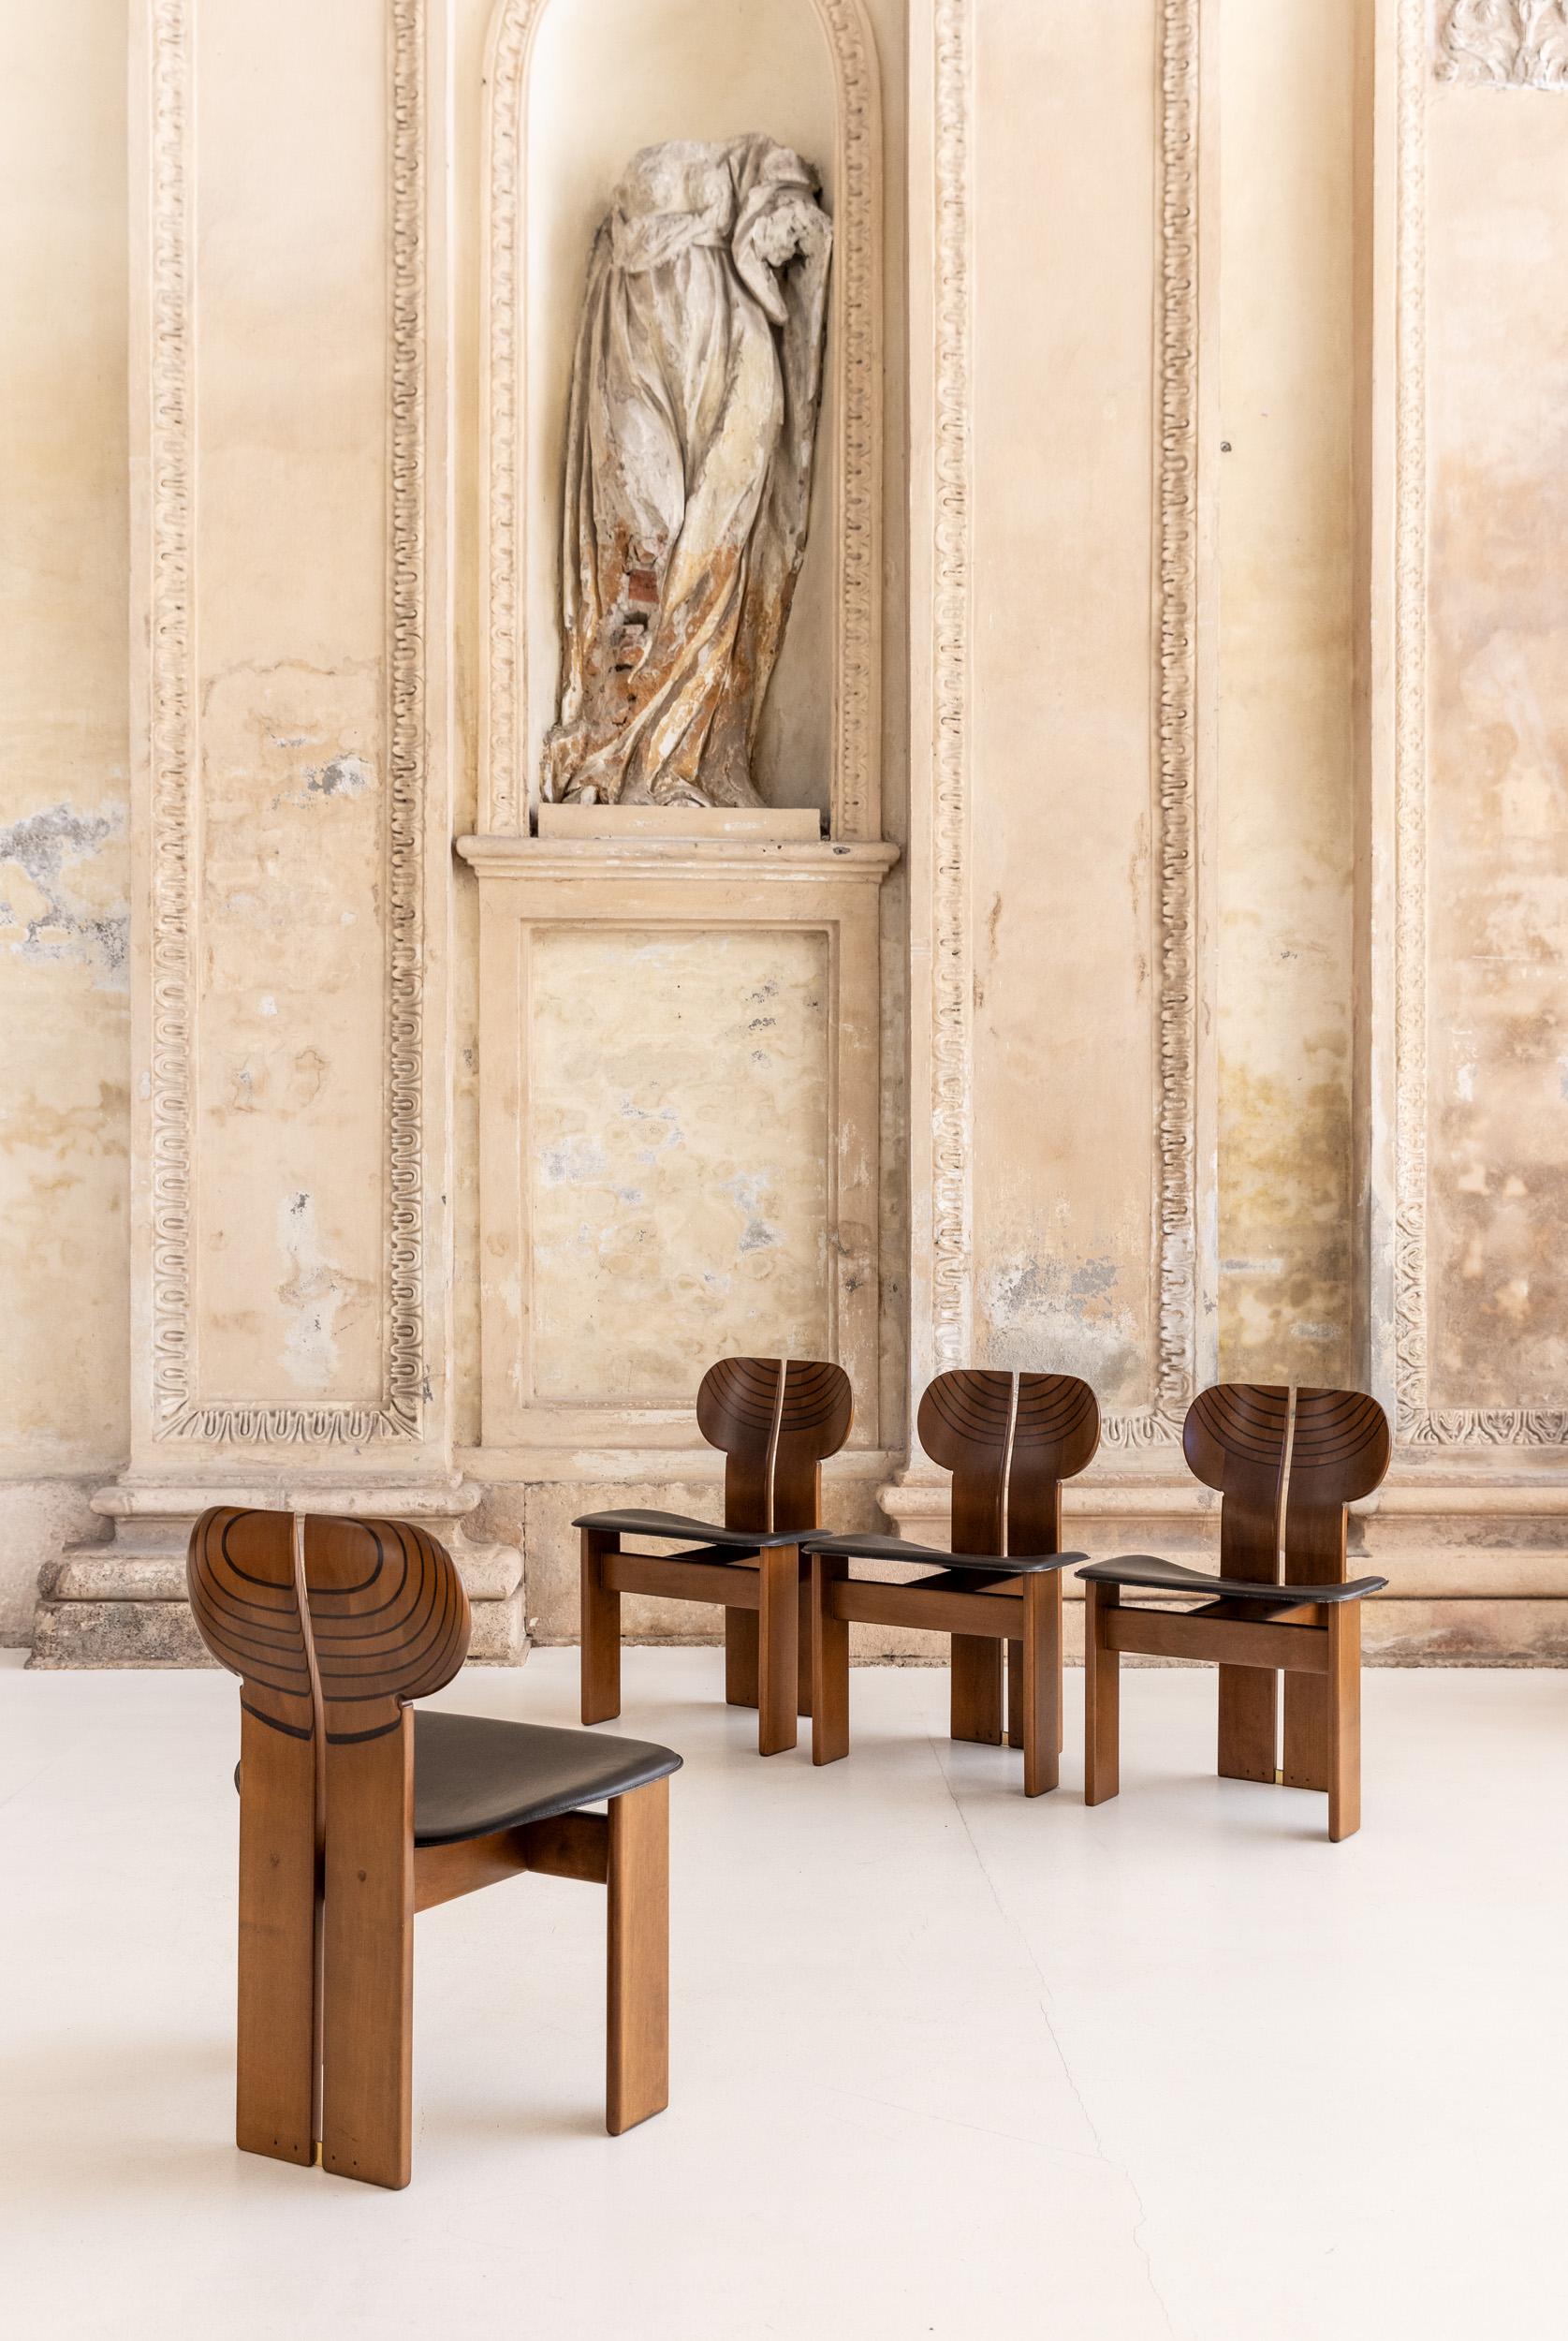 Iconic set of 4 Africa chairs designed by Afra e Tobia Scarpa for Maxalto.
The chairs are in excellent condition , wood marked Maxalto in the back and leather in excellent condition too.
They can match with its dining table.
Bibl G. Gramigna,